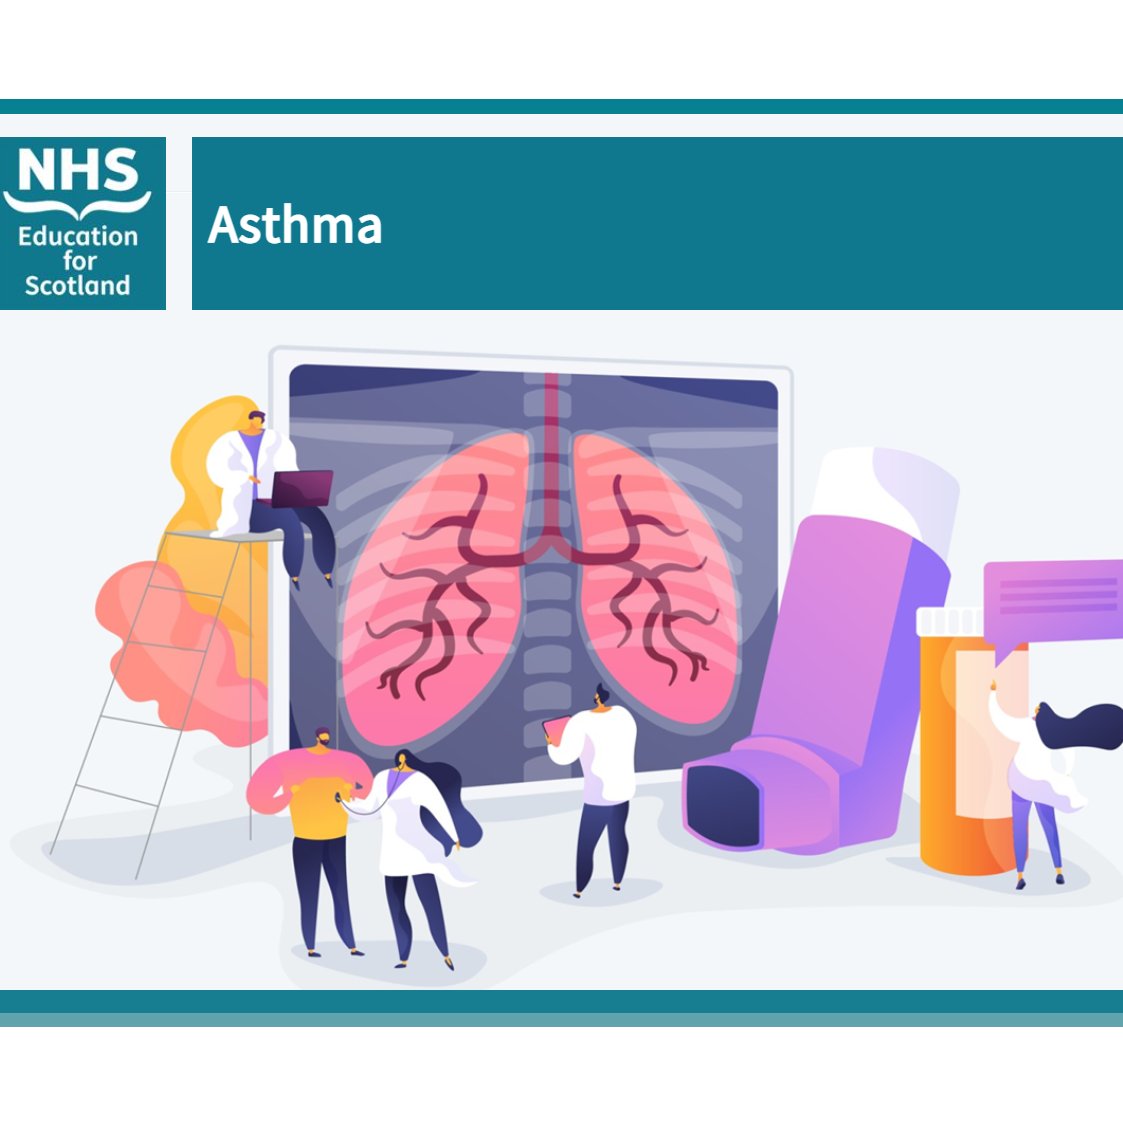 The NES Asthma Turas Learning module is available for your CPD update and is also available for initial training as part of an eLearning Programme. learn.nes.nhs.scot/59935 This fully funded eLearning is available to GPNs across Scotland for access at a time convenient to you